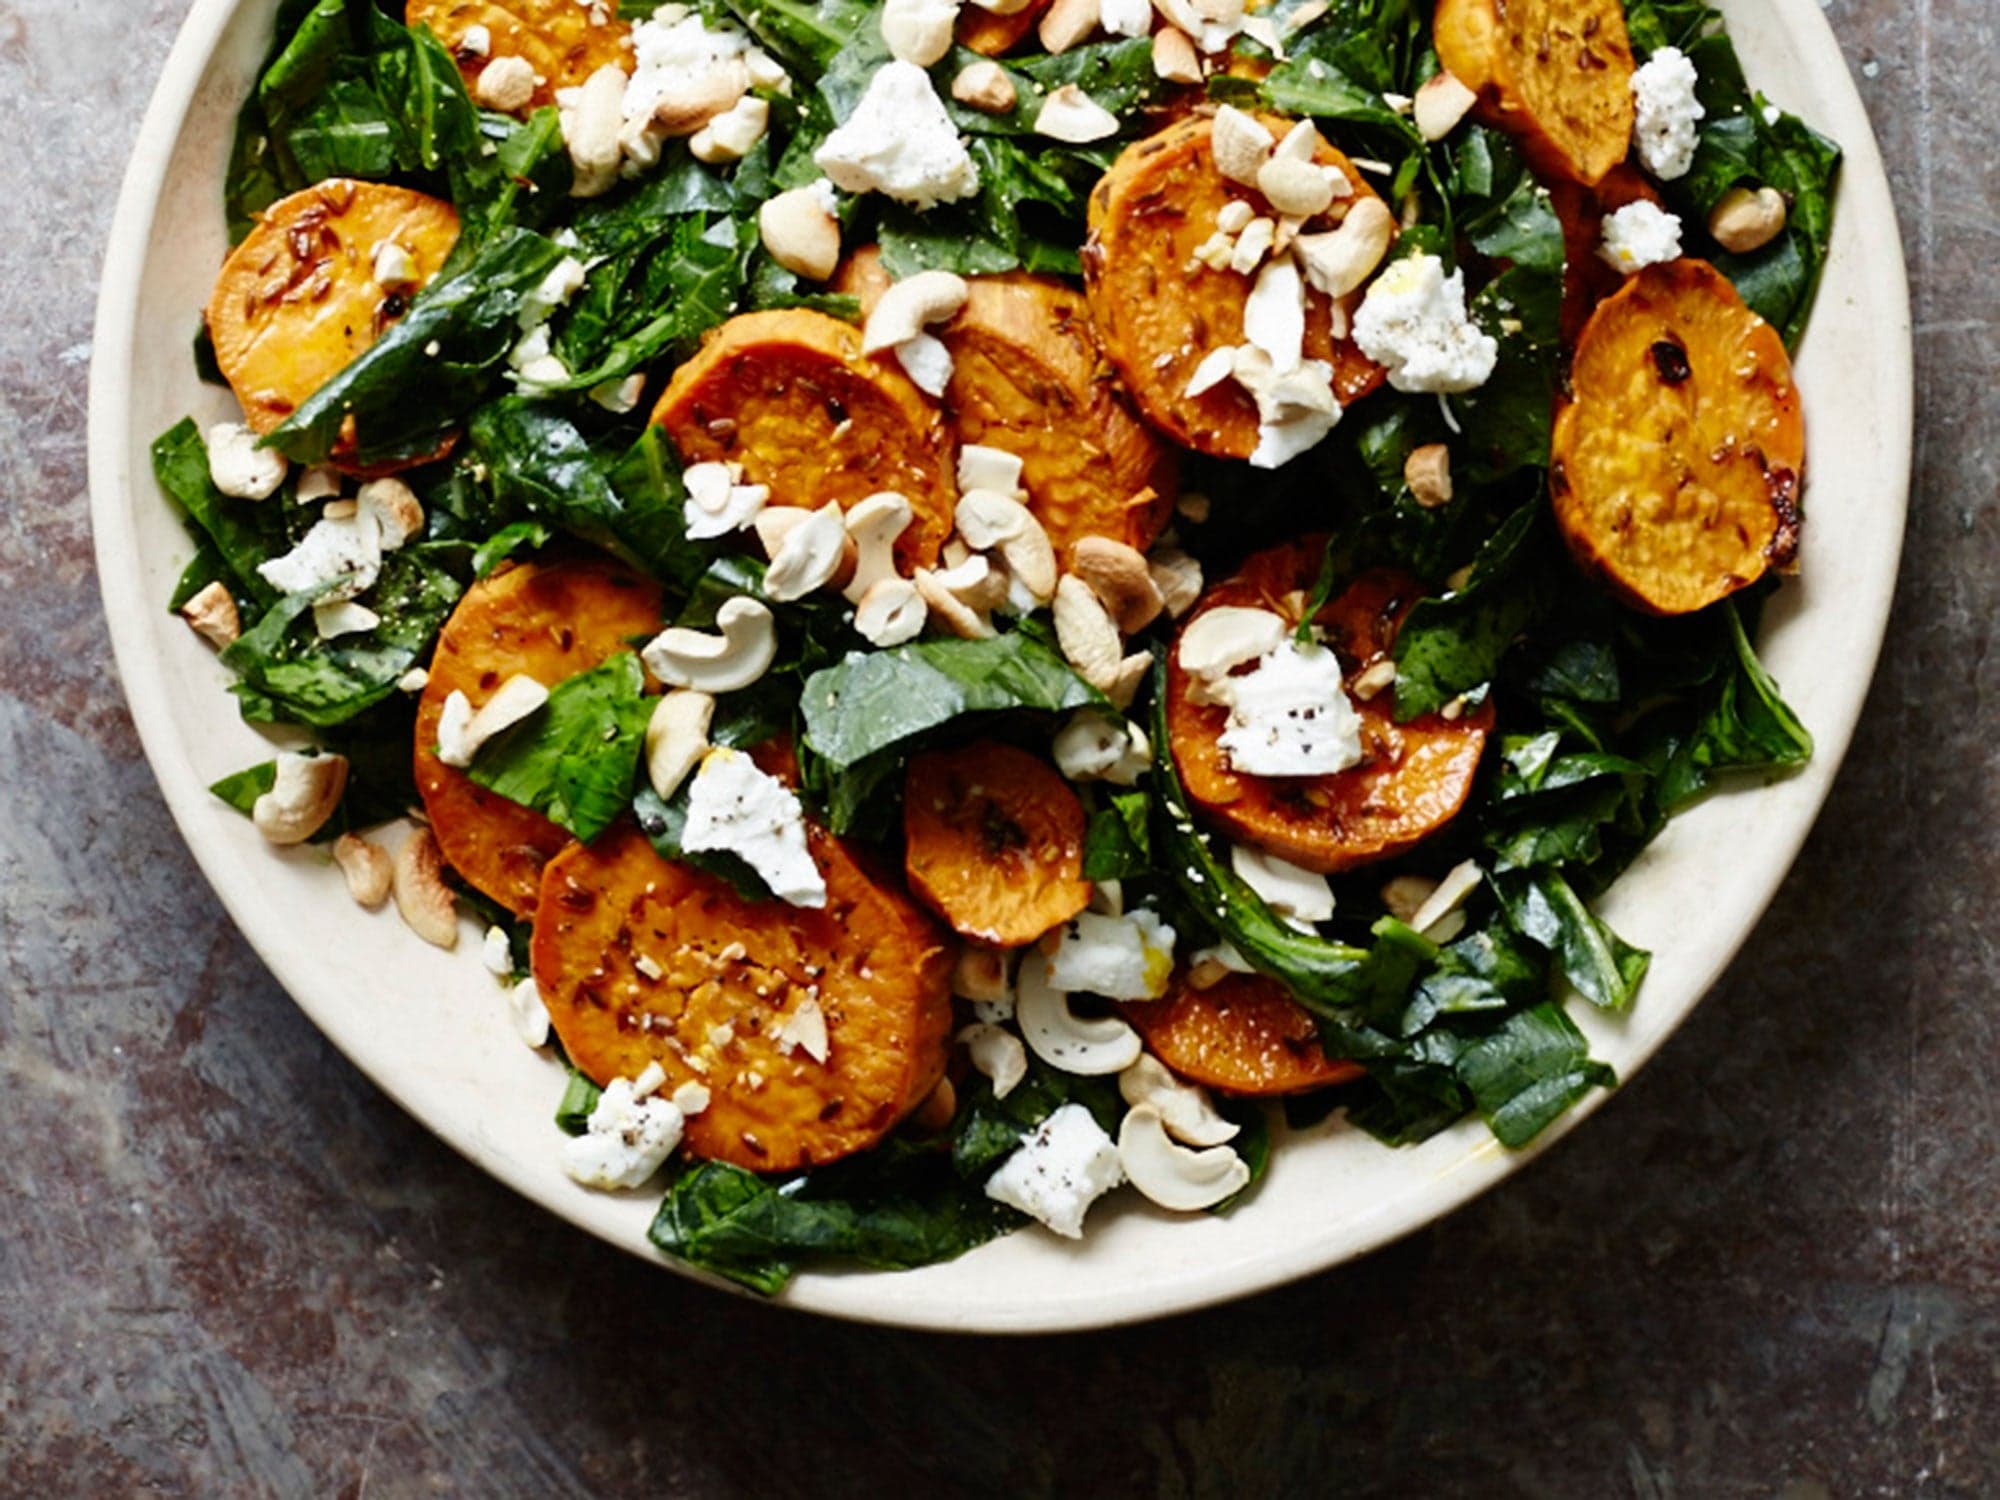 Shredded Collard Green Salad with Roasted Sweet Potatoes and Cashews for Thanksgiving Sides